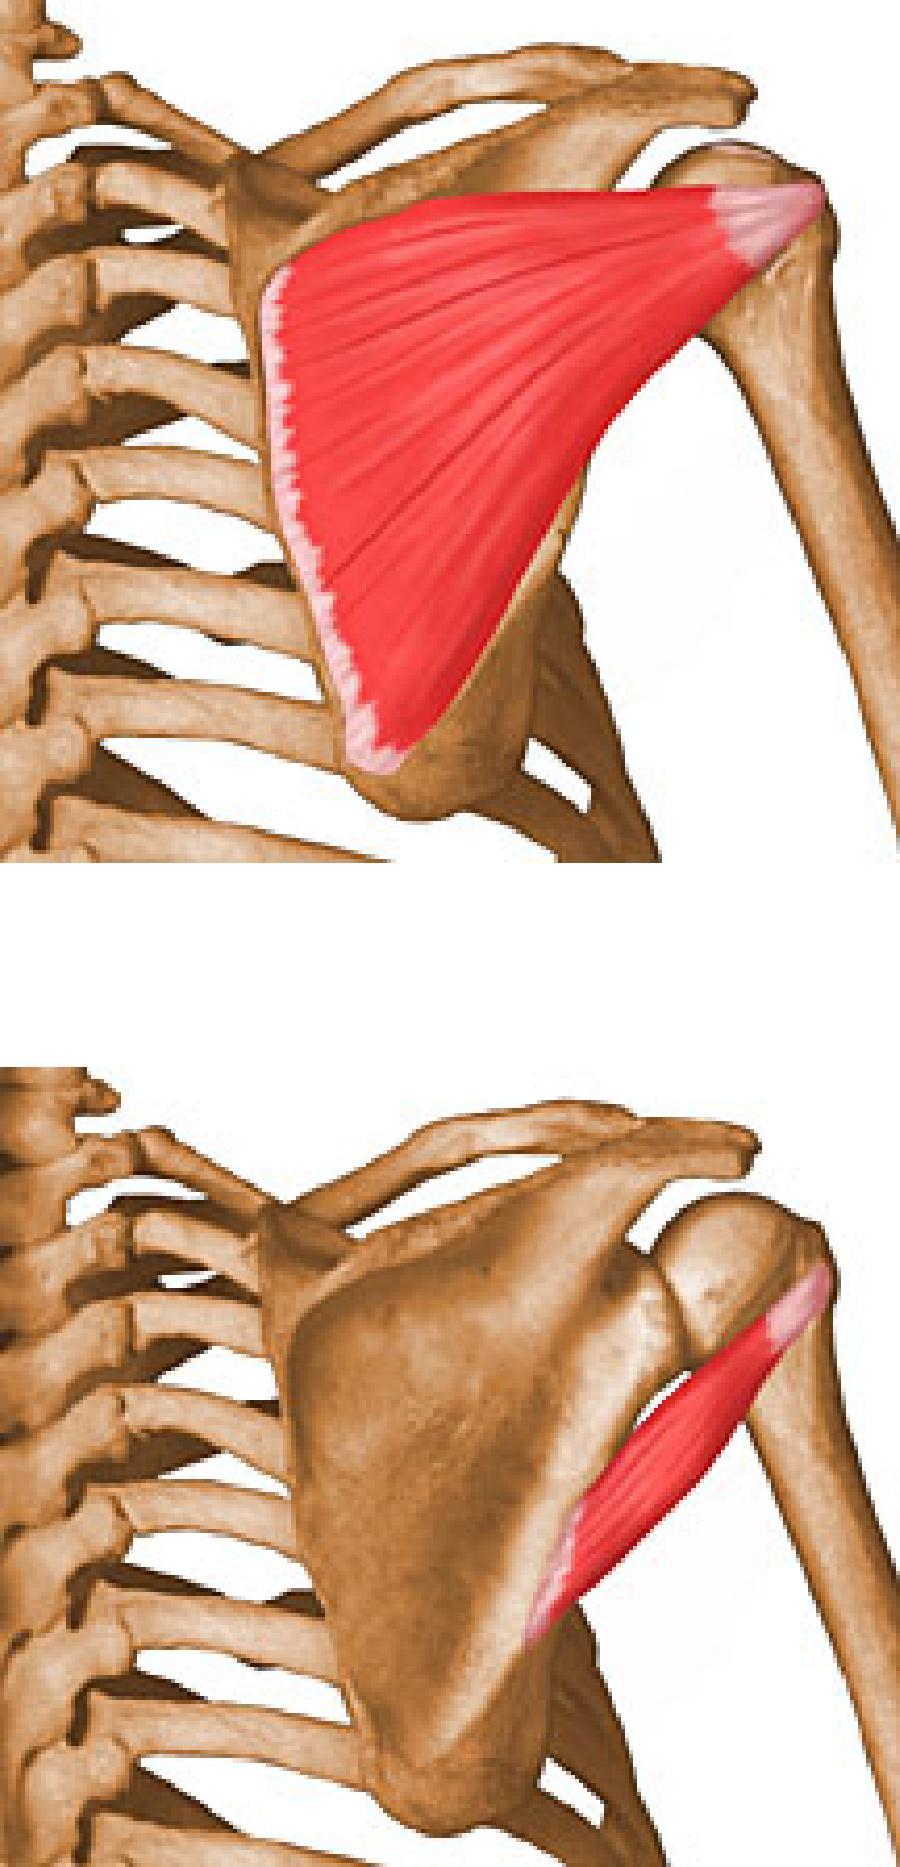 Muscle of the shoulder Infraspinatus In the infraspinous fossa of scapula,triangular Origin: infraspinous fossa of scapula, across The back of the shoulder joint.